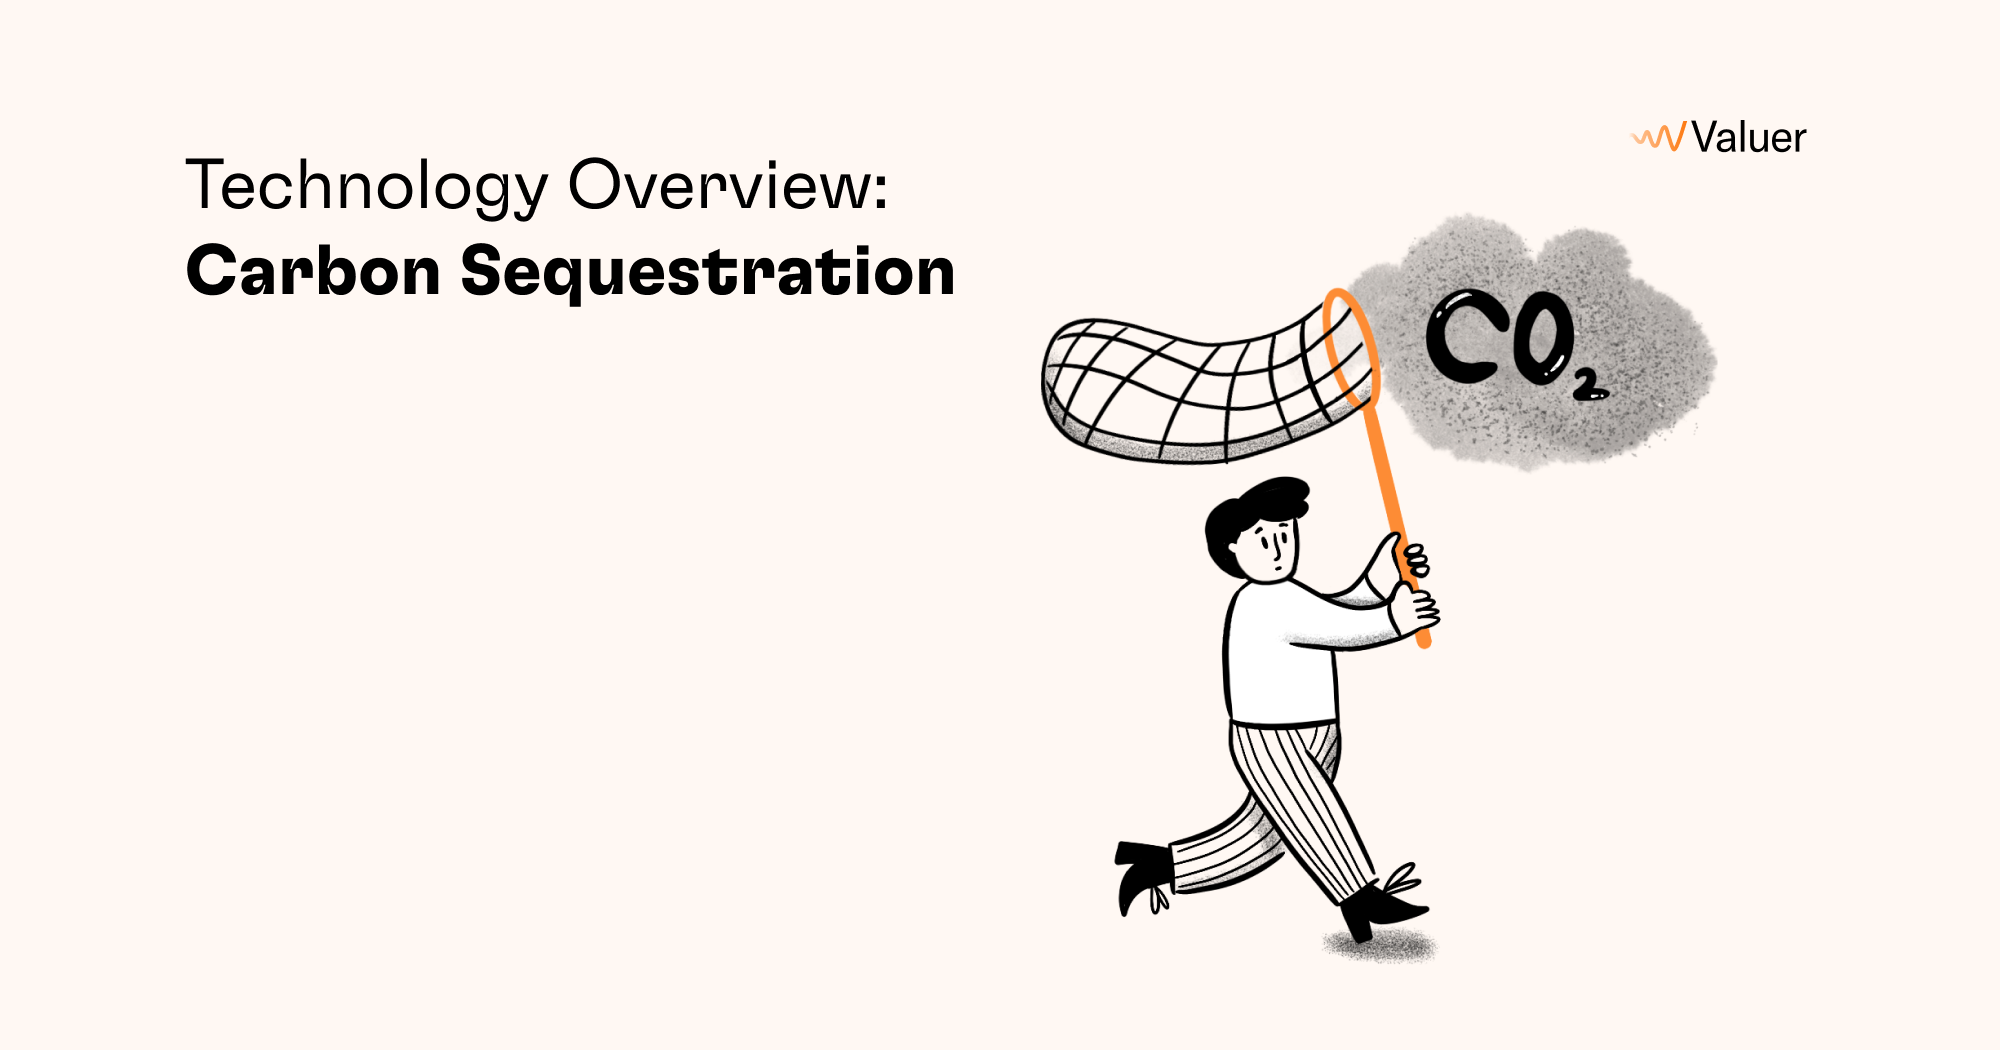 Technology Overview: Carbon Sequestration